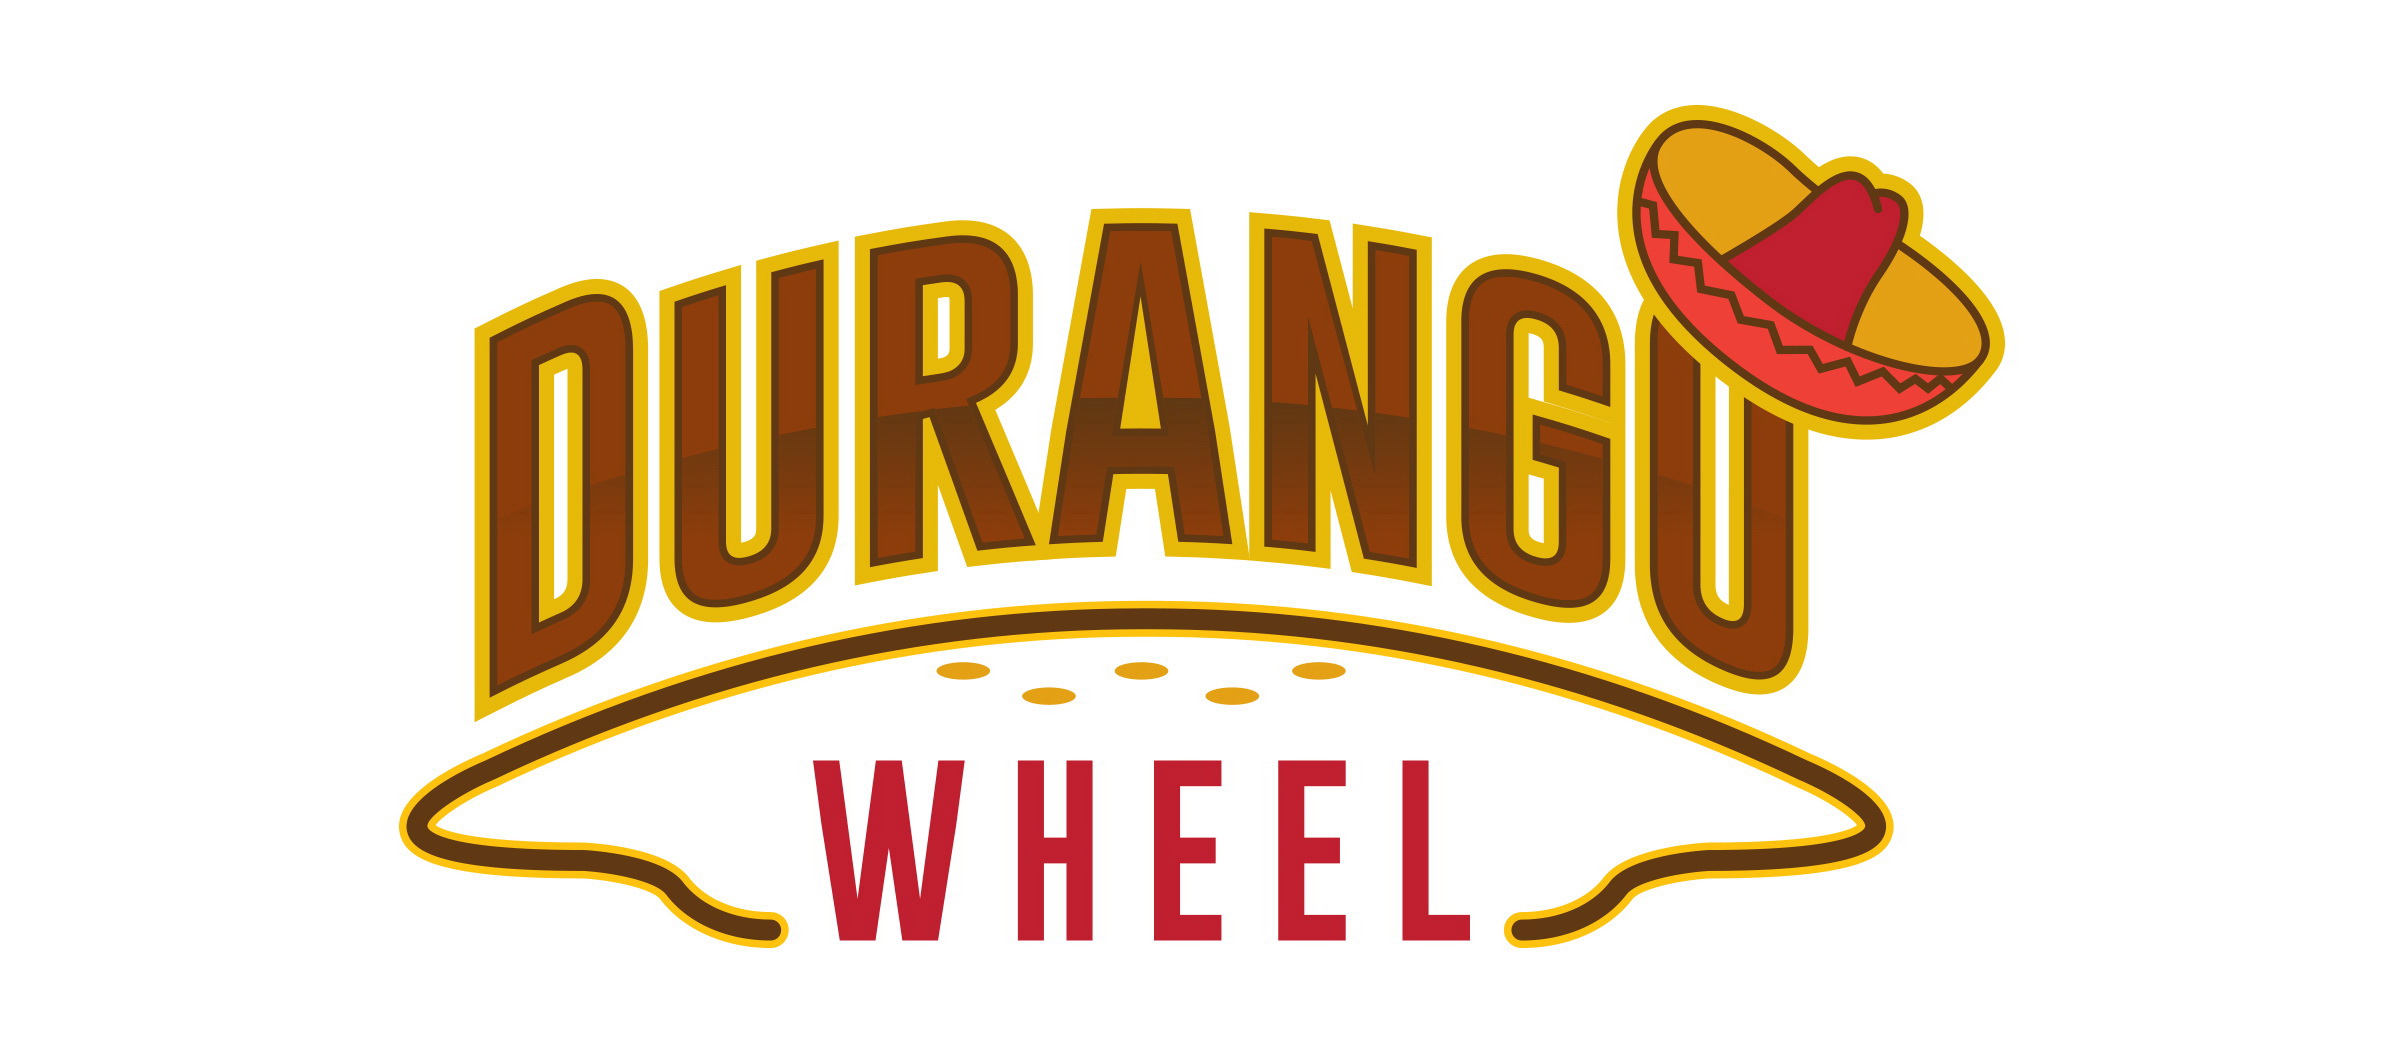 The Durango Wheel is a kitchen invention which aids people in creating one of the delicious Mexican dishes called the mexi-burger.